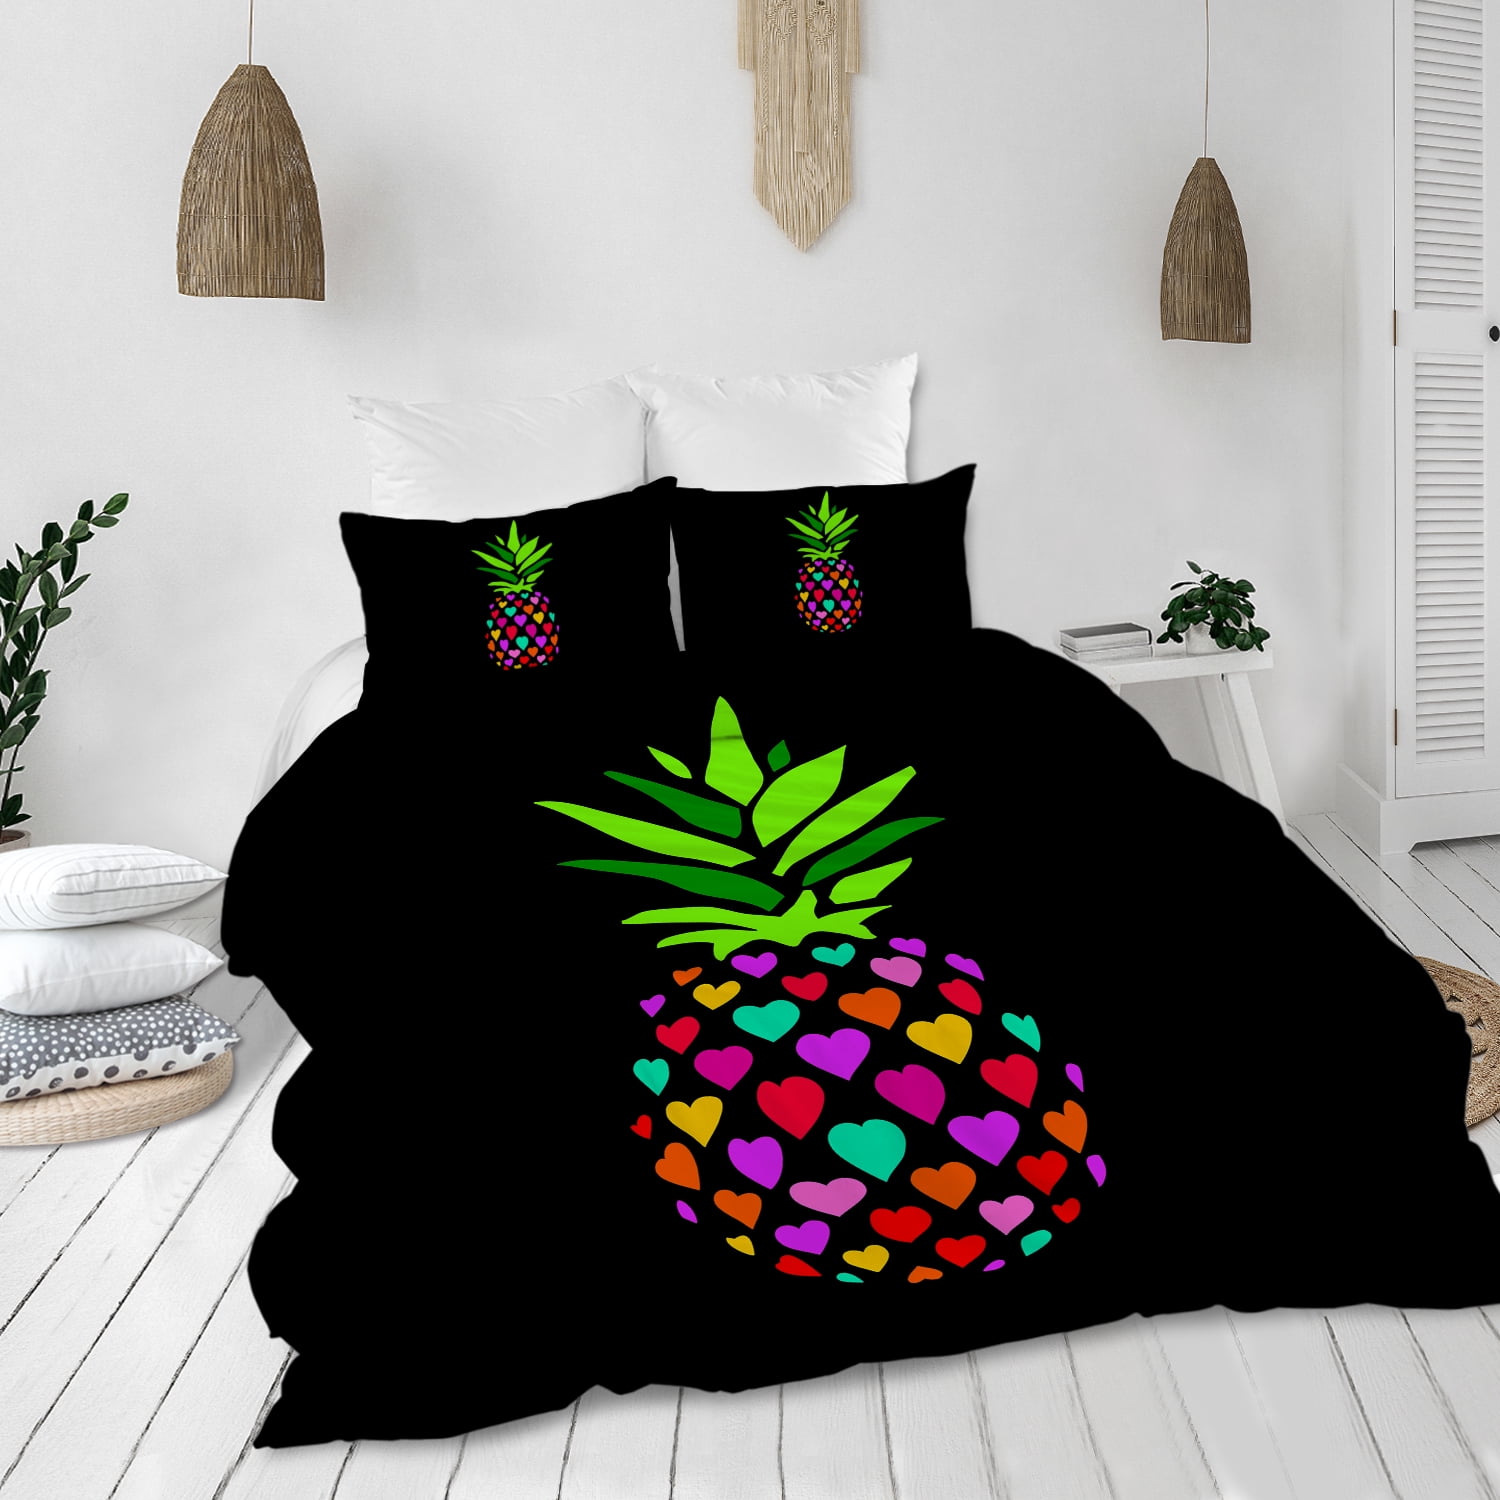 2Pcs Pineapple Printed Bed Pillow Cases Cover Bedding Pillowcase Soft Queen King 